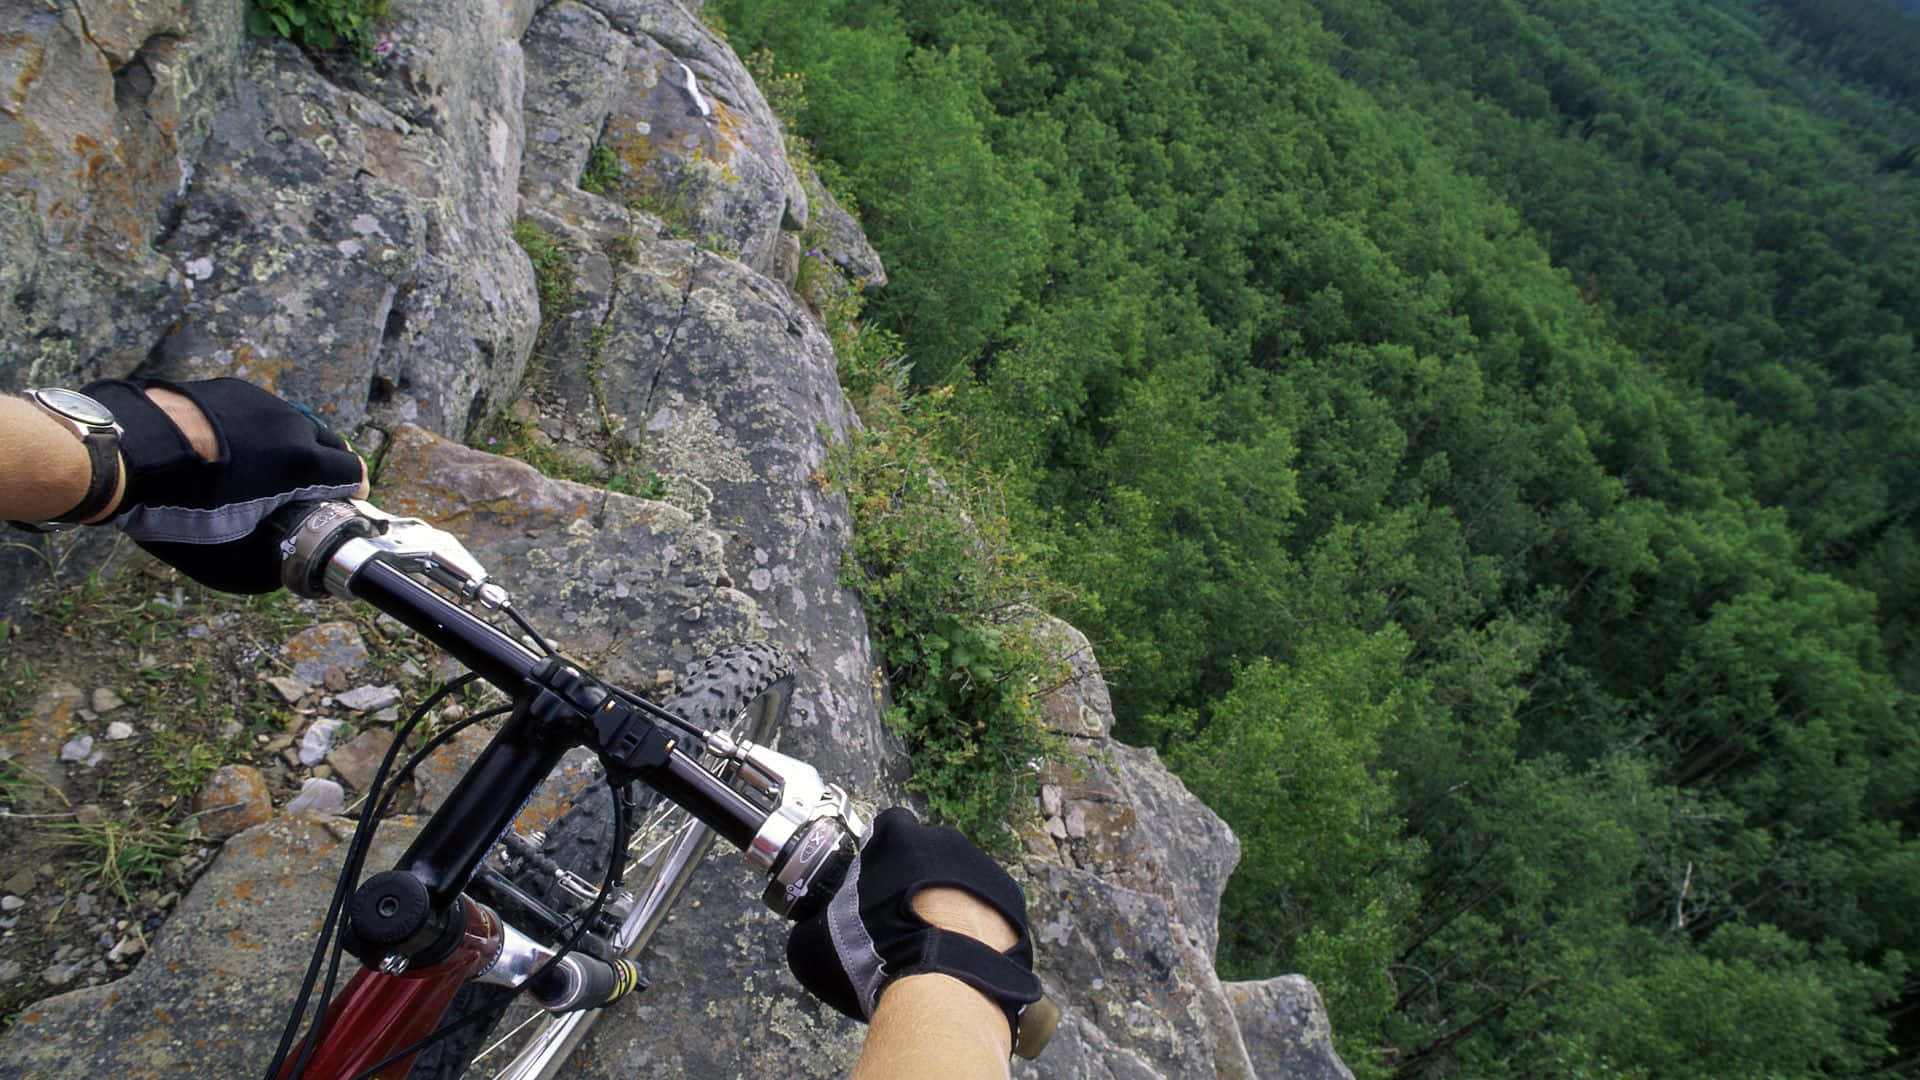 Thrilling mountain bike ride through the forest